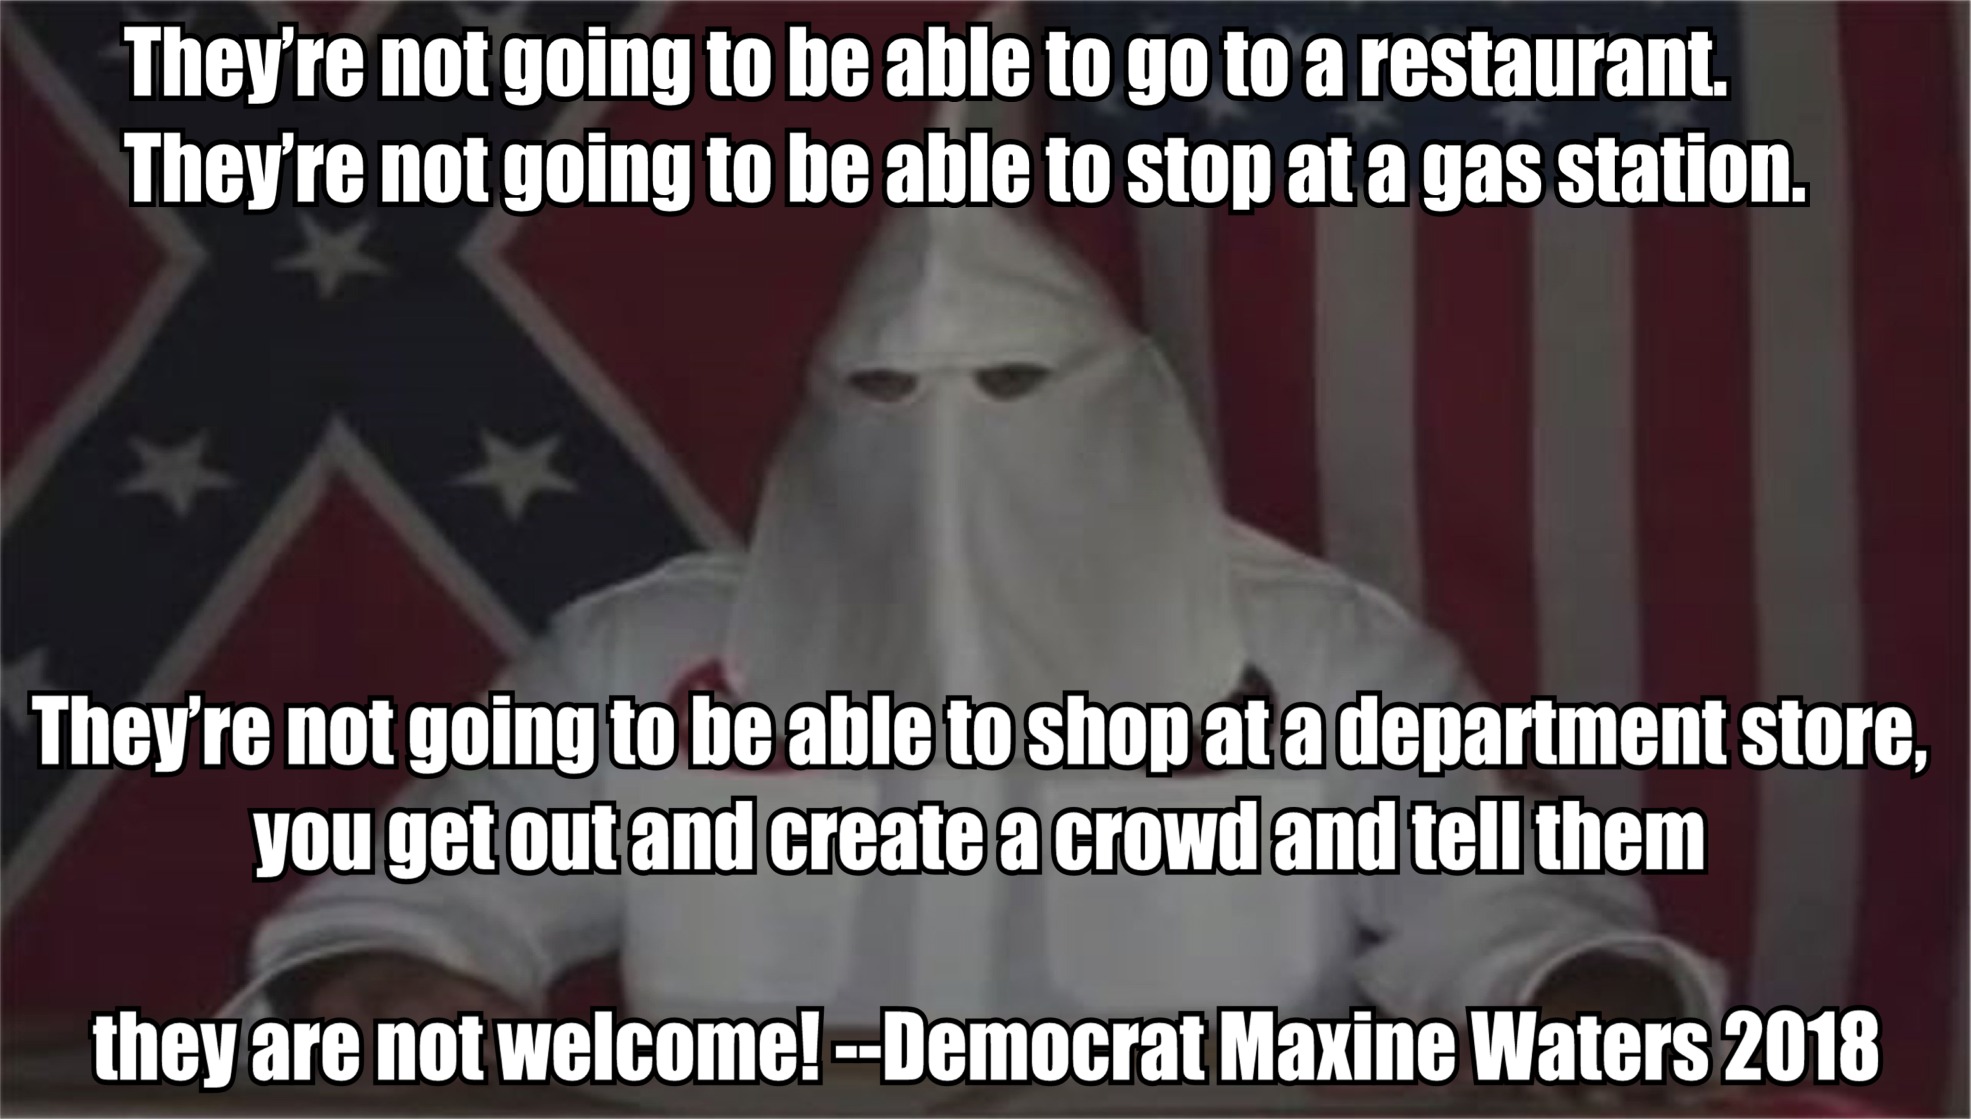 photo caption - They're not going to be able to go to a restaurant. They're not going to be able to stop at a gas station. They're not going to be able to shop at a department store, you get out and create a crowd and tell them they are not welcome! Democ